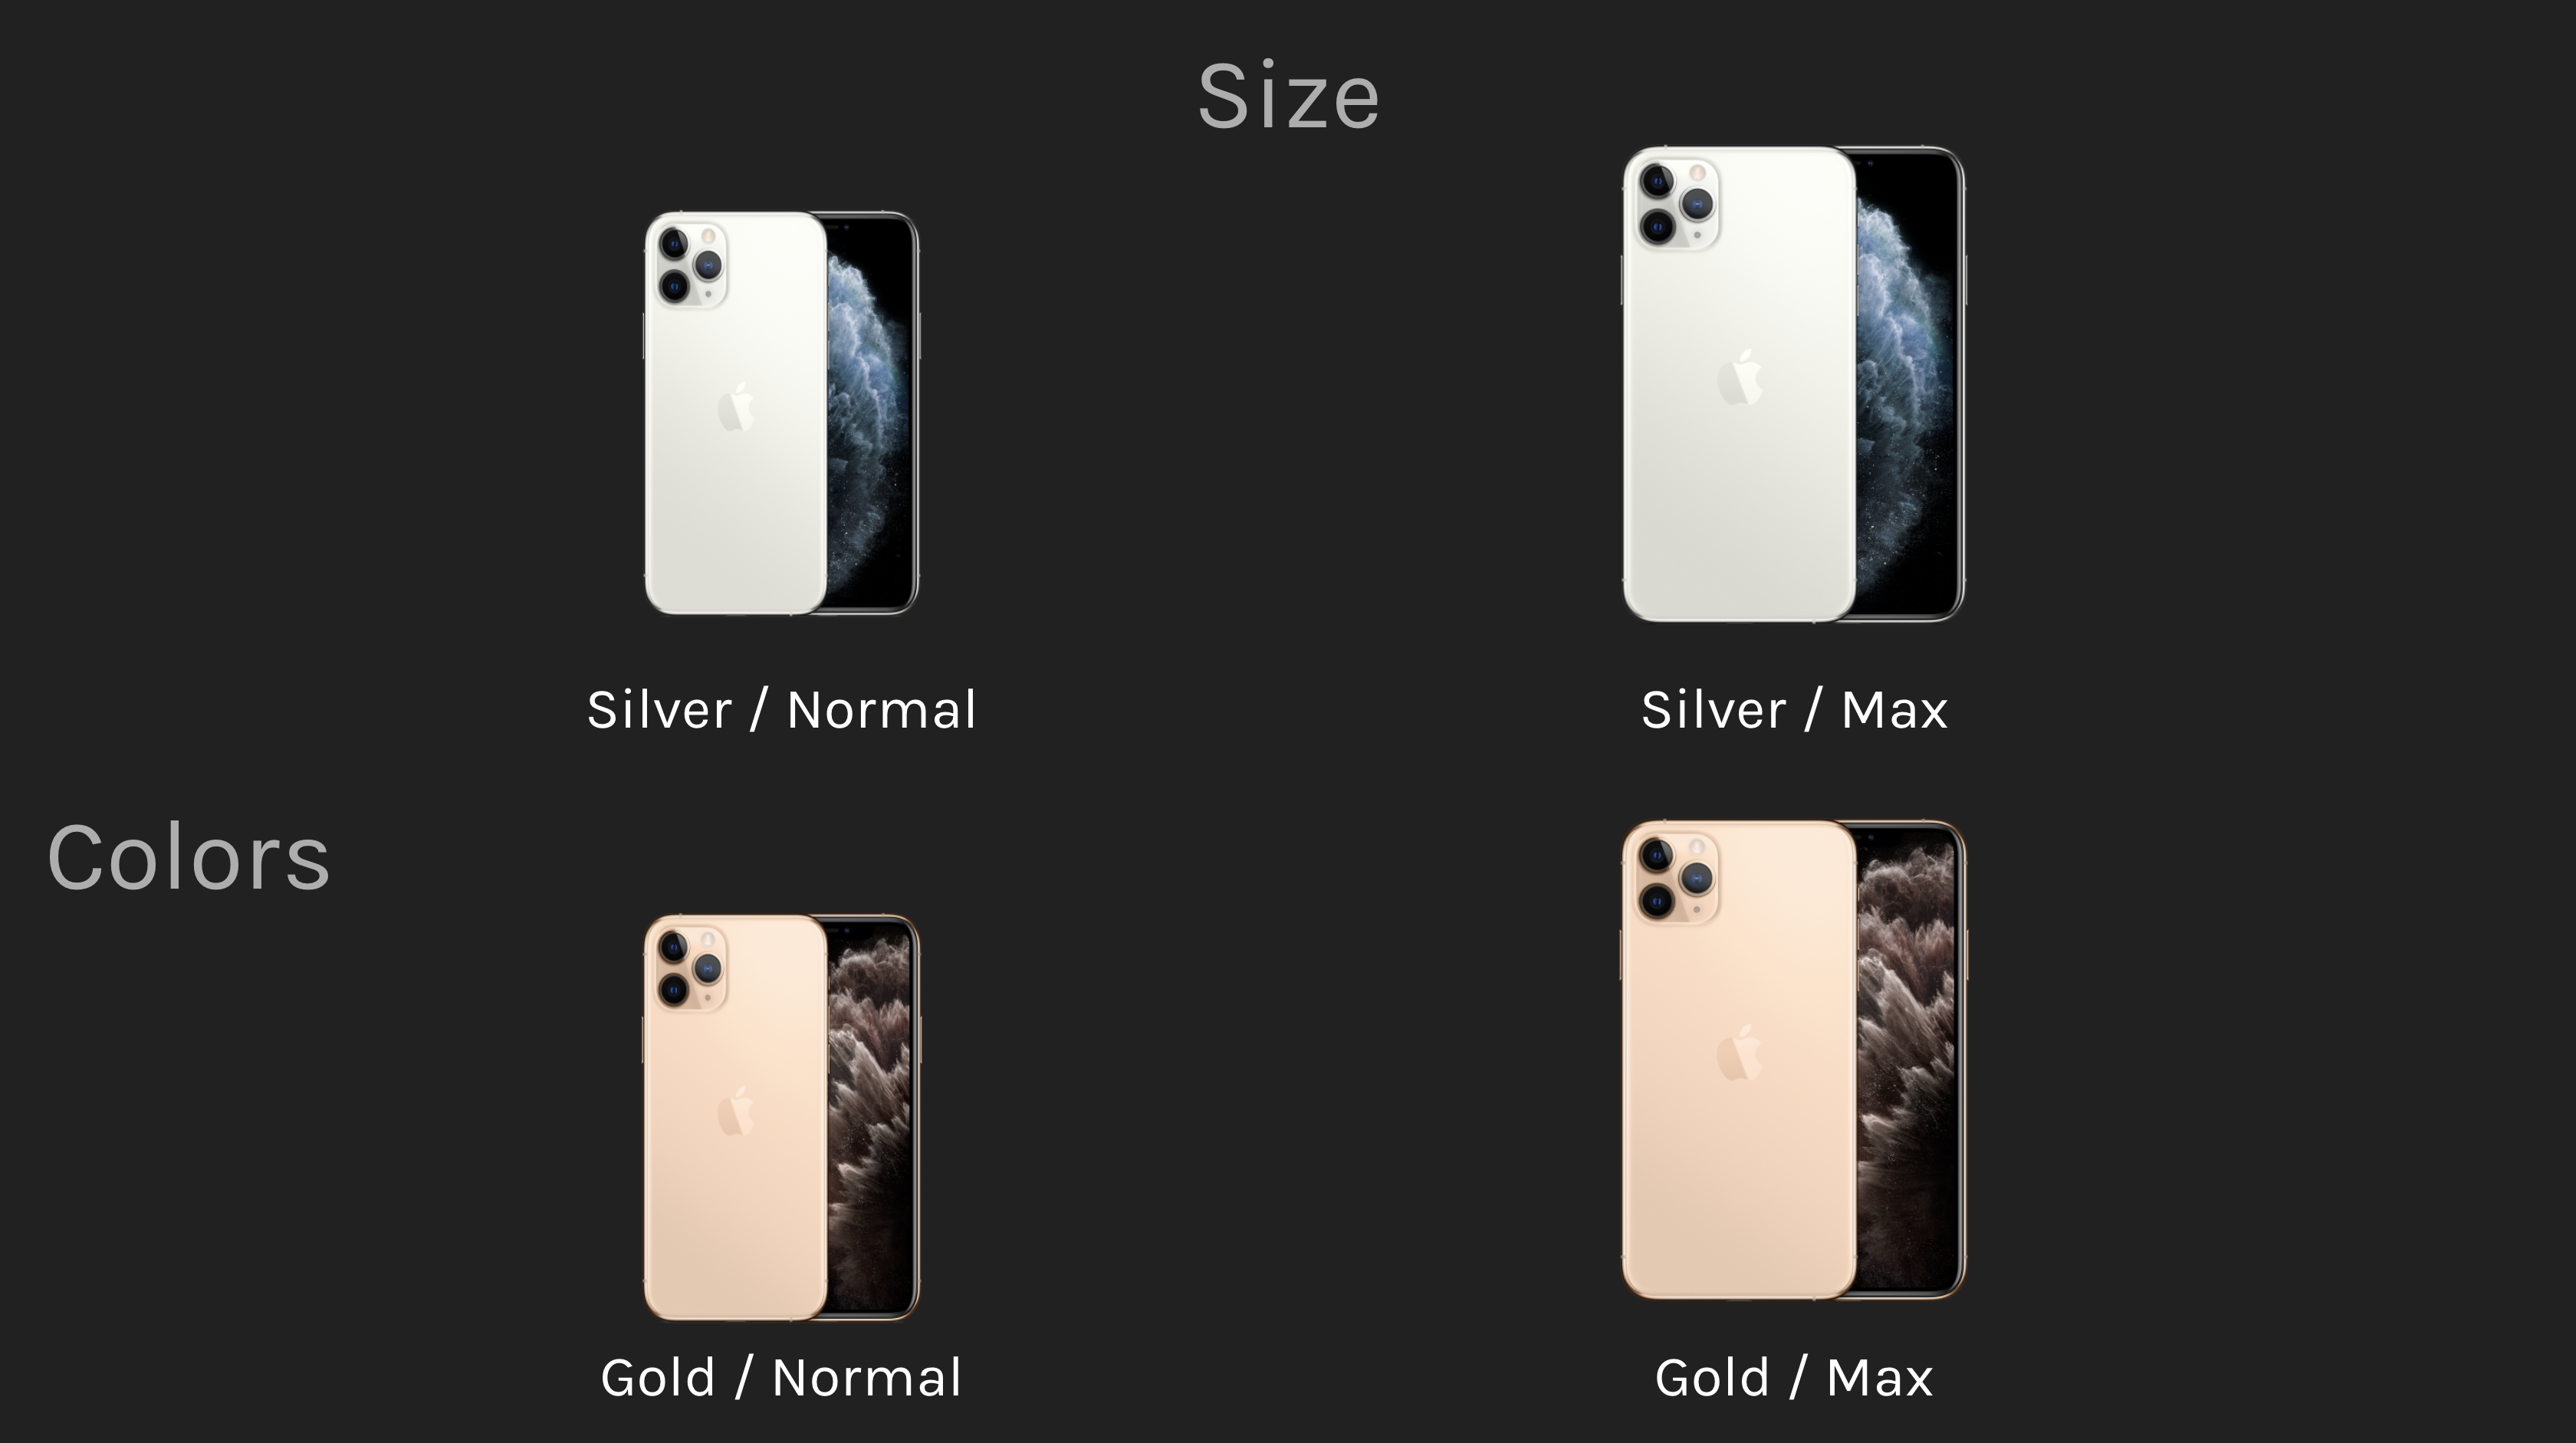 A matrix of iPhones with Size and Colors as the two axes. This demonstrates a two-dimensional way to visualize product options within Shopify.